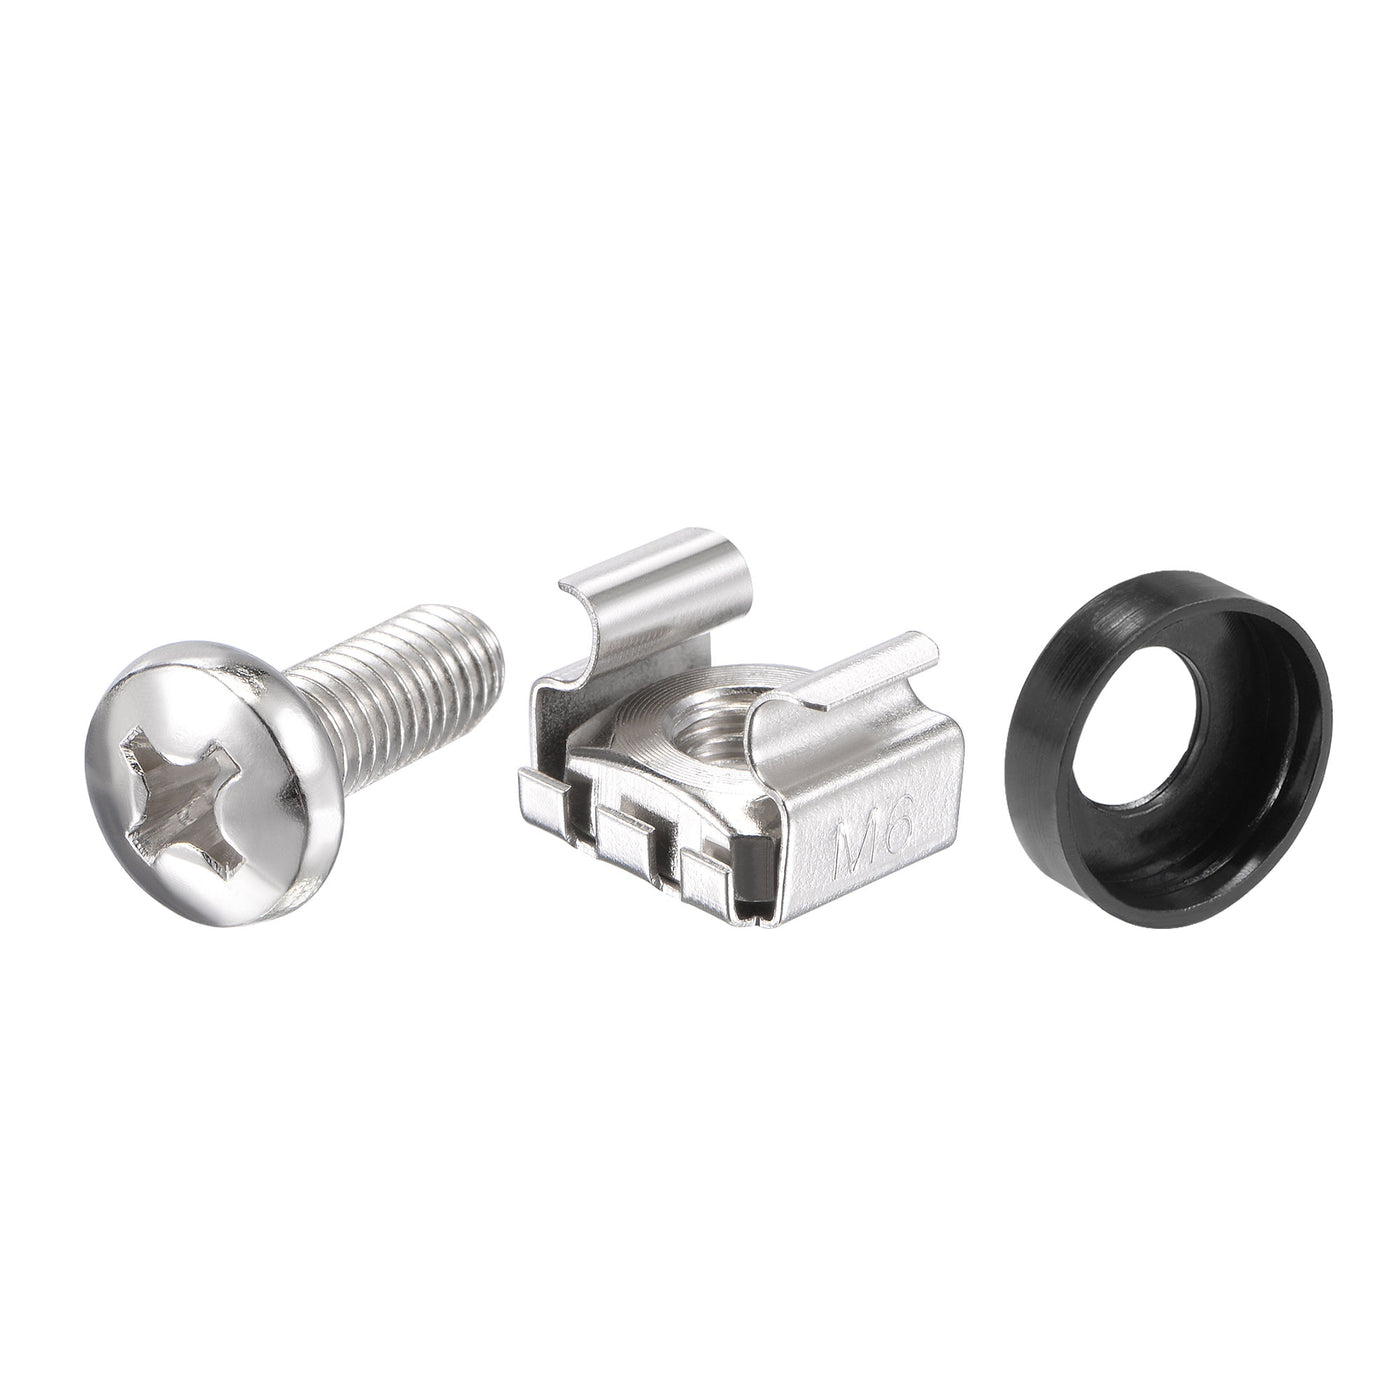 uxcell Uxcell M6x16mm Server Rack Cage Nuts Silver Tone 20Set, Mounting Screws for Server Shelves